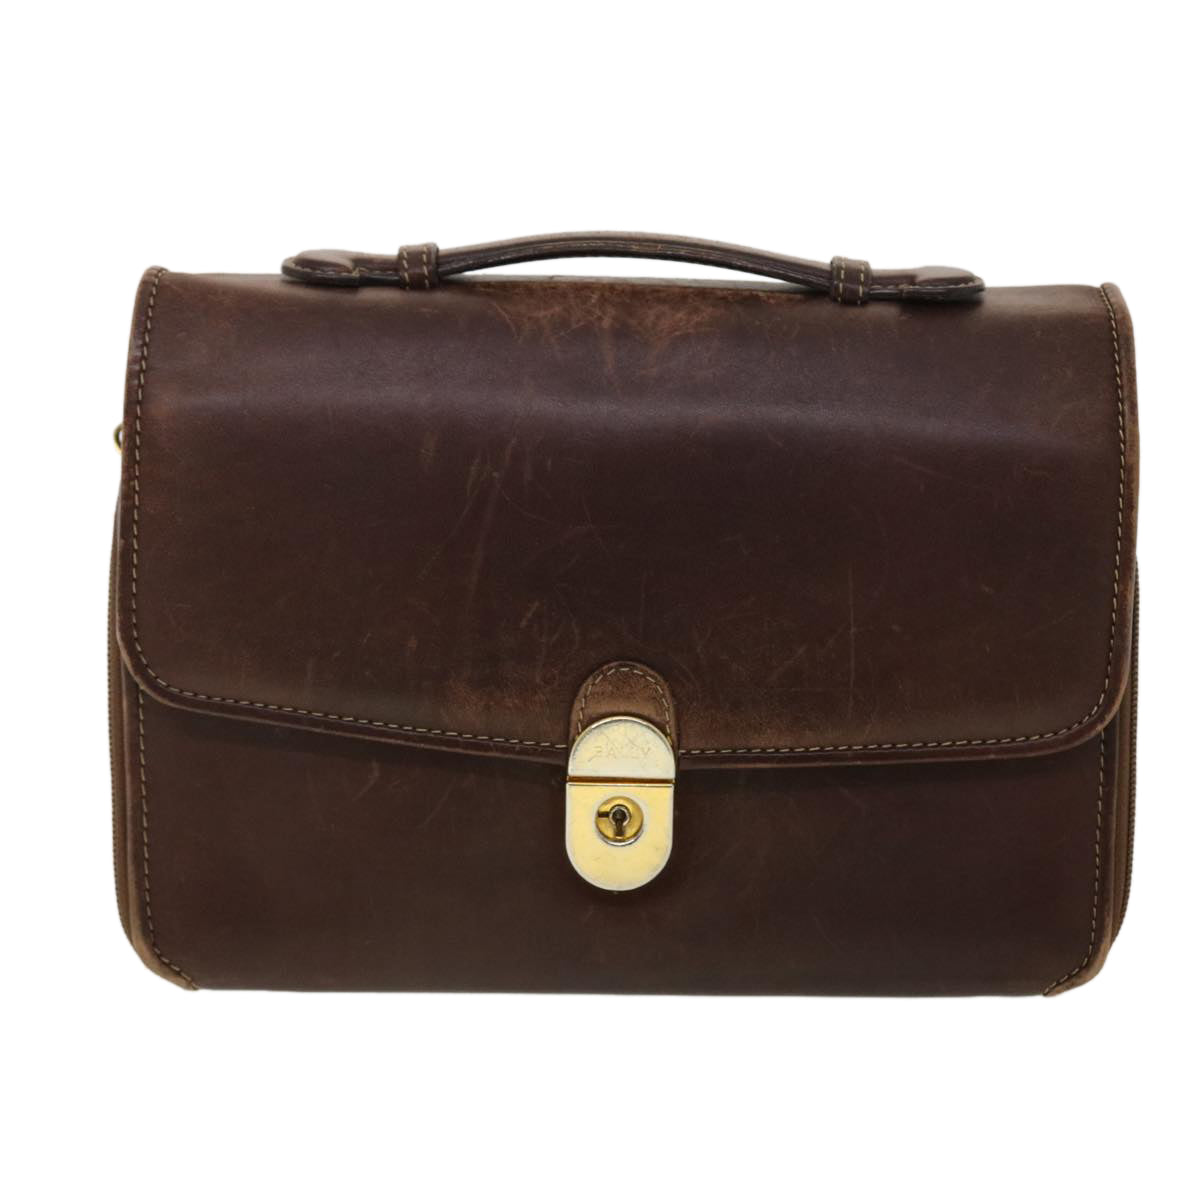 BALLY Shoulder Bag Leather Brown Auth bs4788